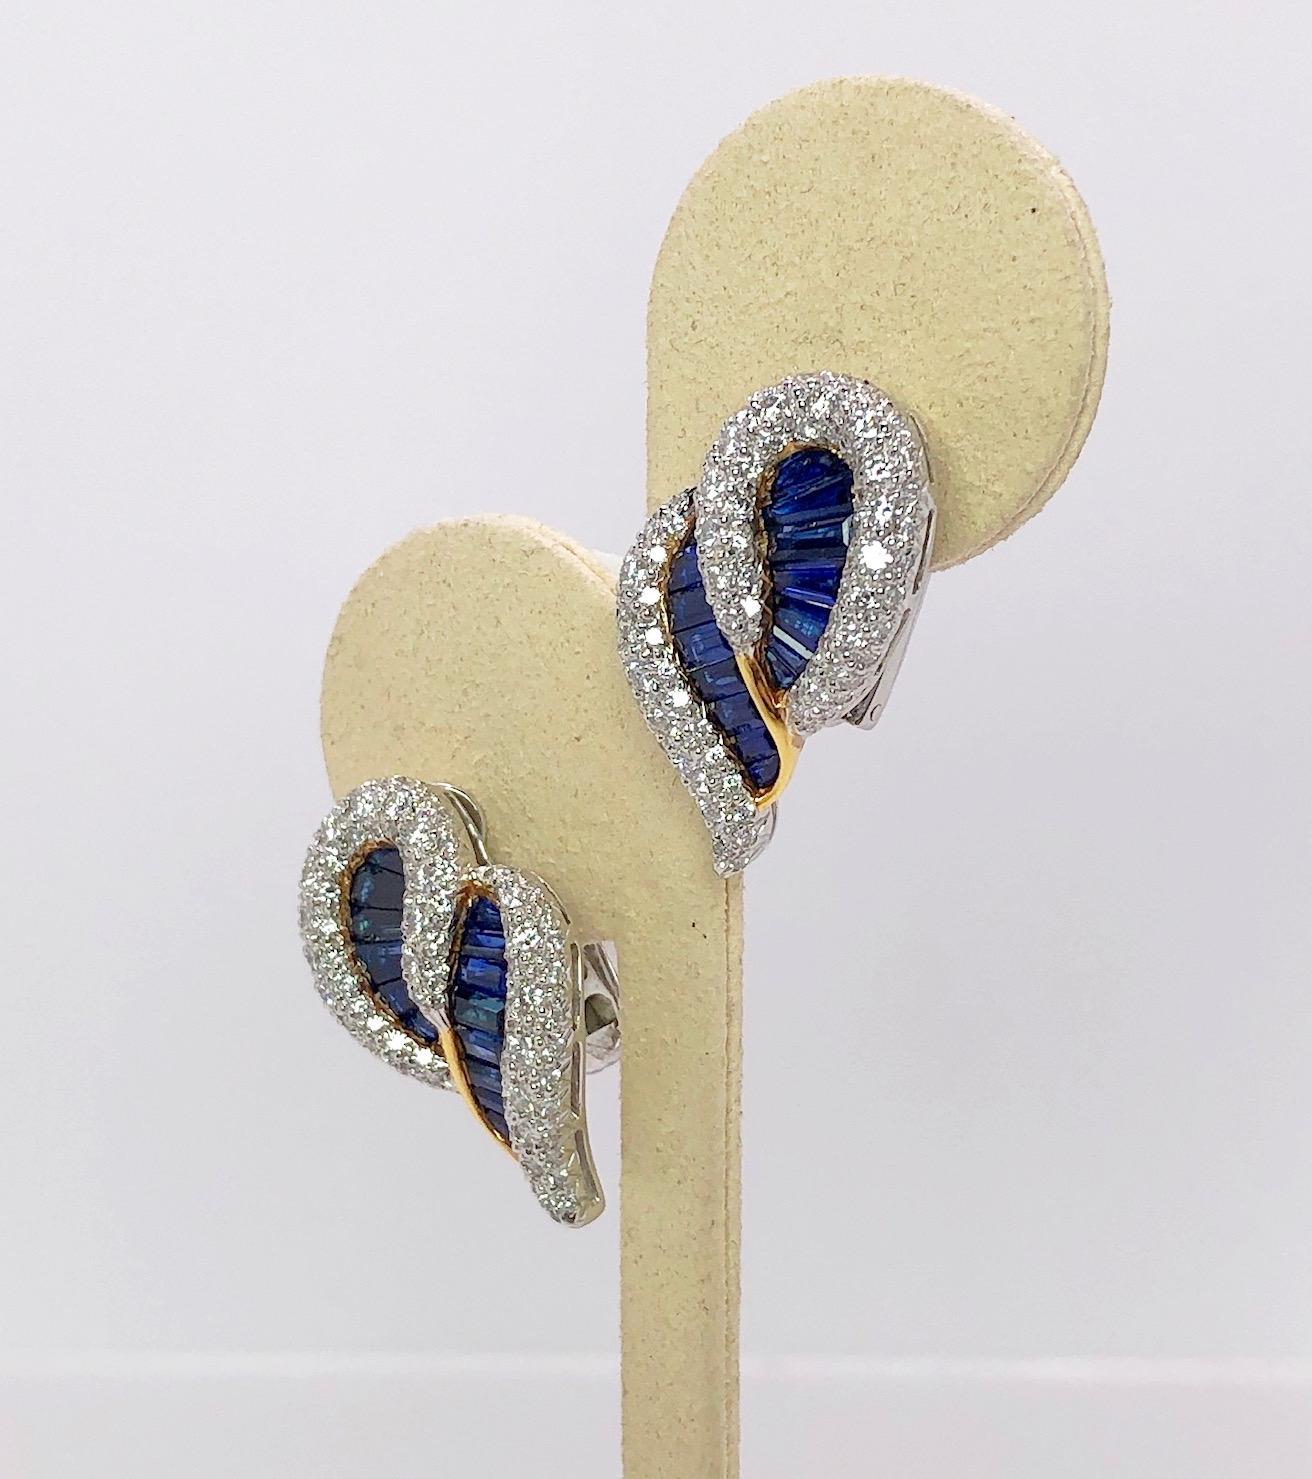 These beautifully crafted and designed double paisley earrings are set in 18 Karat yellow and white gold, with 4.46Cts. of Baguette cut blue sapphires, and 2.29Cts. of round brilliant diamonds. Clip earrings with collapsible post. 
Earrings measure